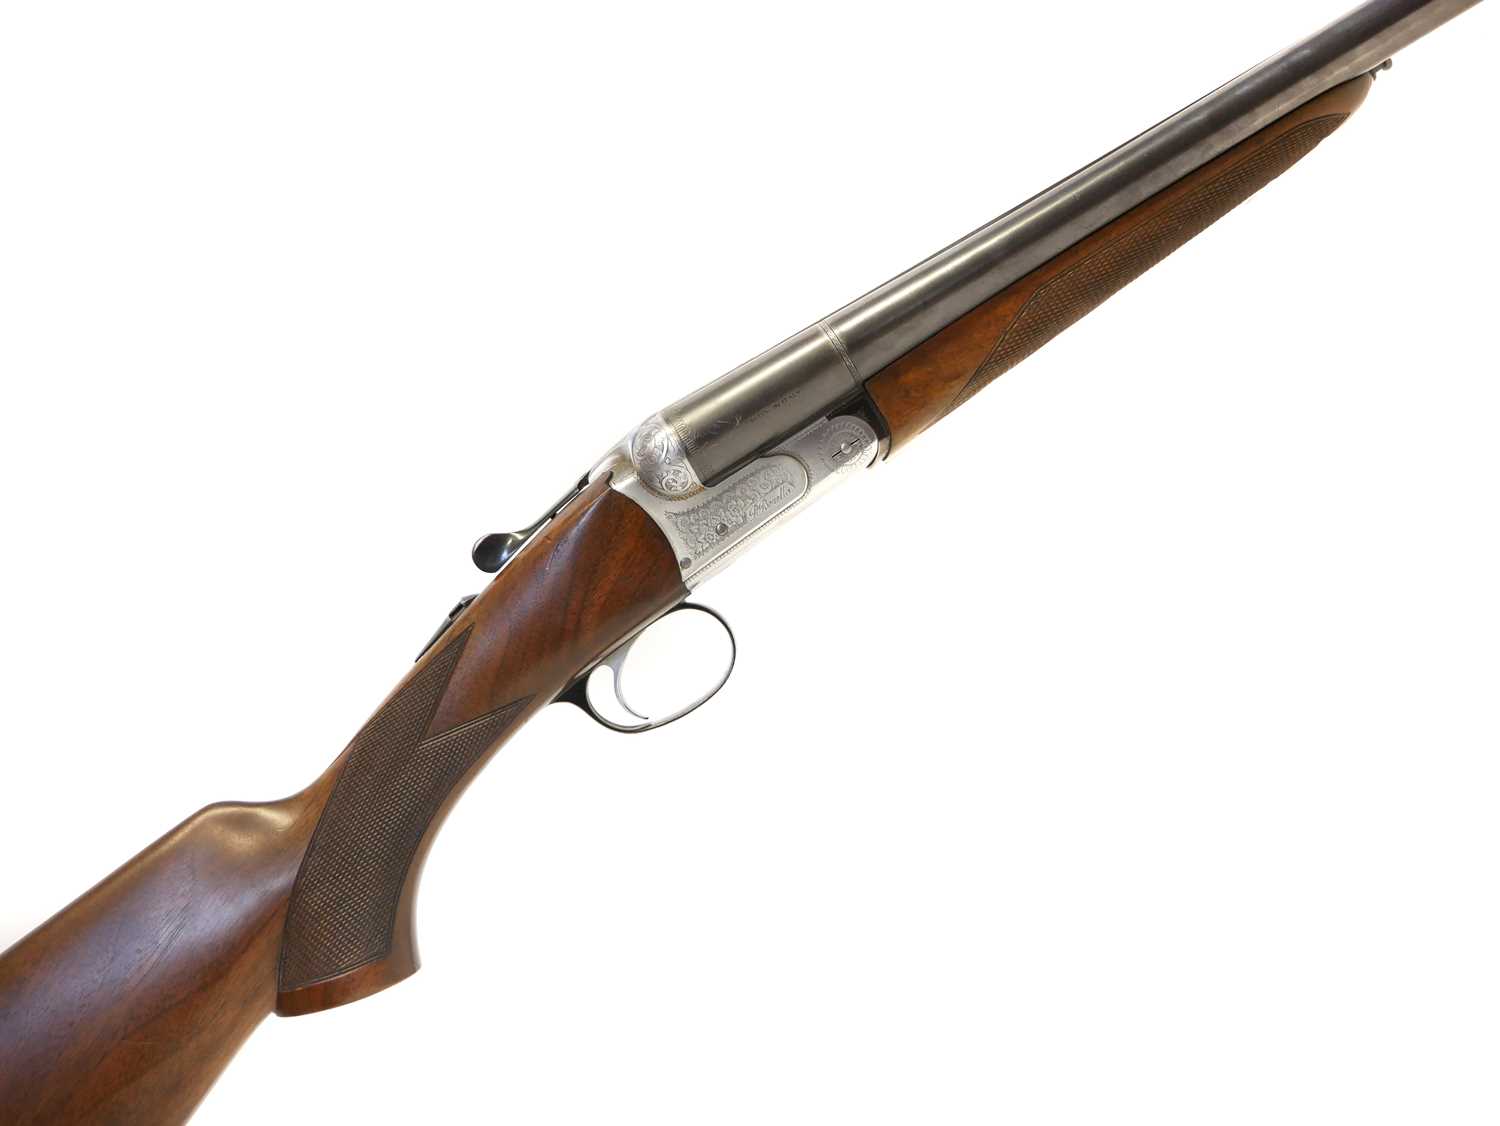 Beretta 12 bore side by side Model 626E shotgun, serial number A40366A, 28inch barrels with half and